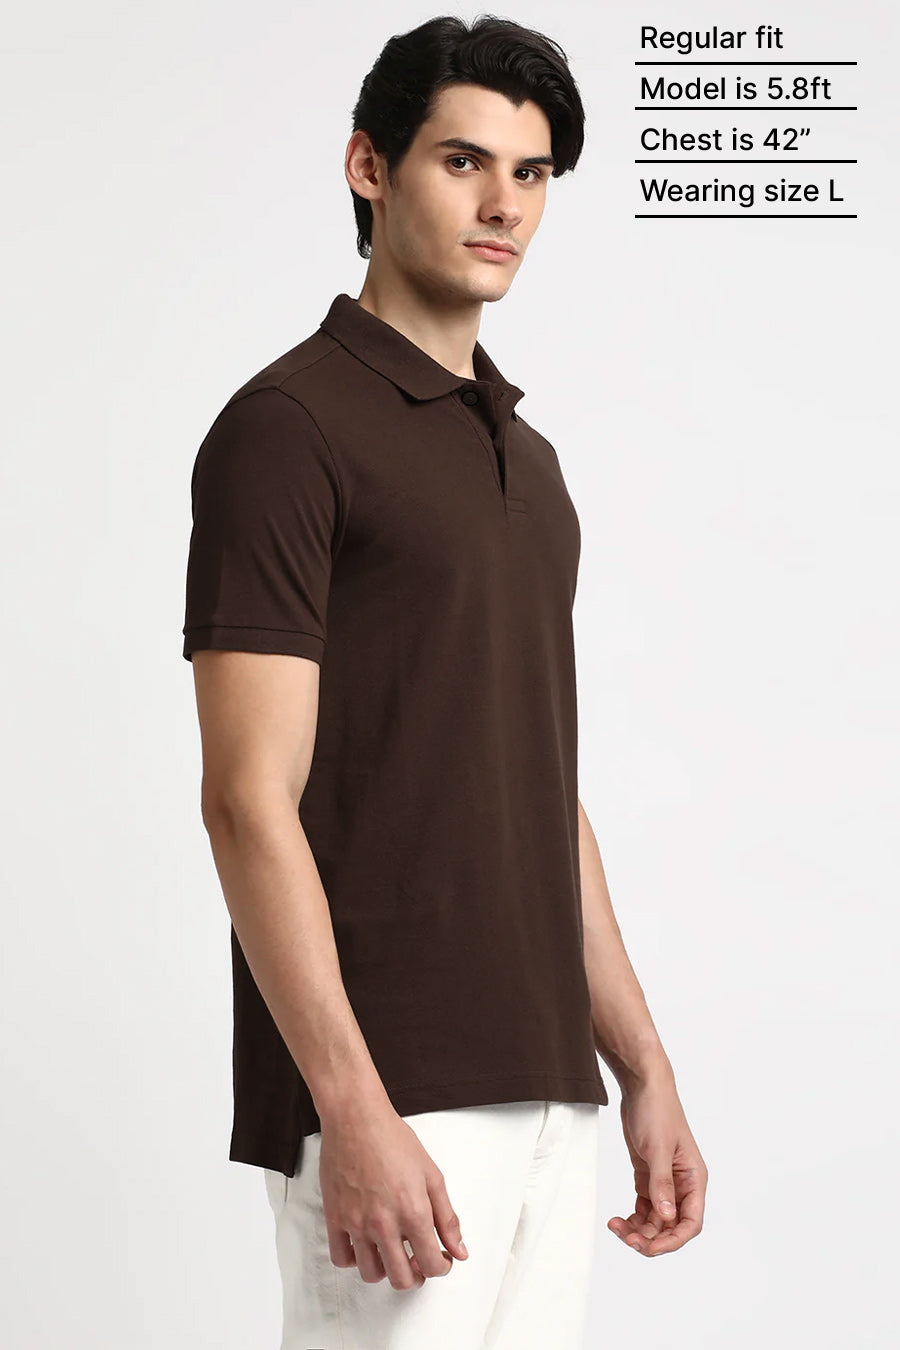 Classic Polo in Coffee Brown